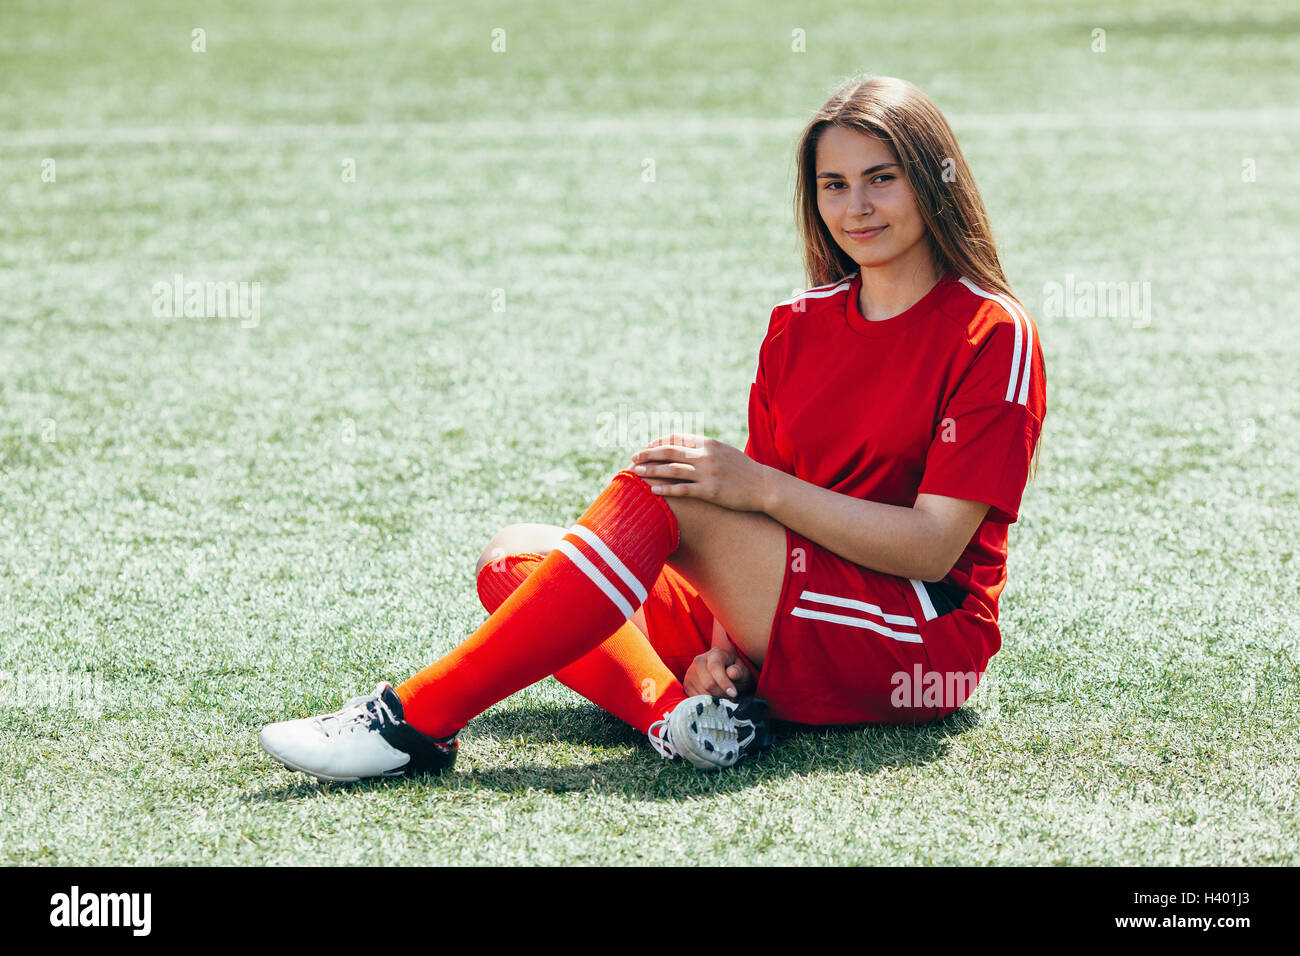 Portrait of cheerful teenage soccer player sitting on field Stock Photo